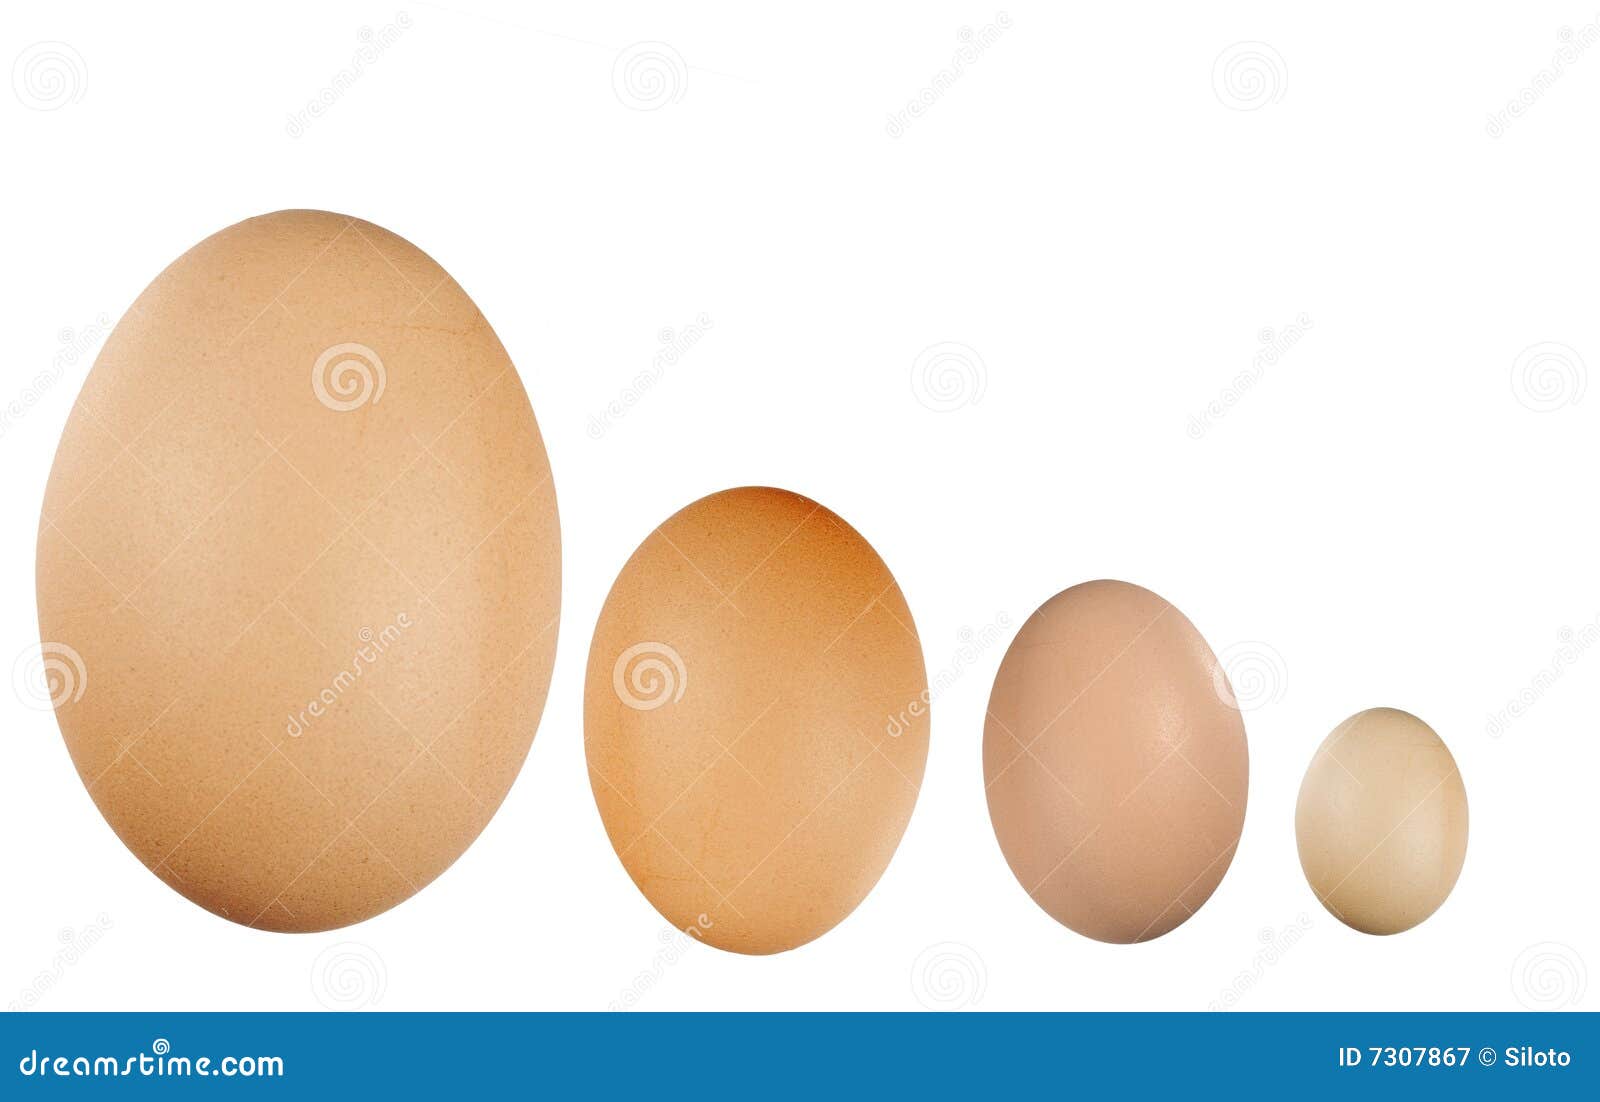 Giant Eggs Stock Photos and Pictures - 5,156 Images